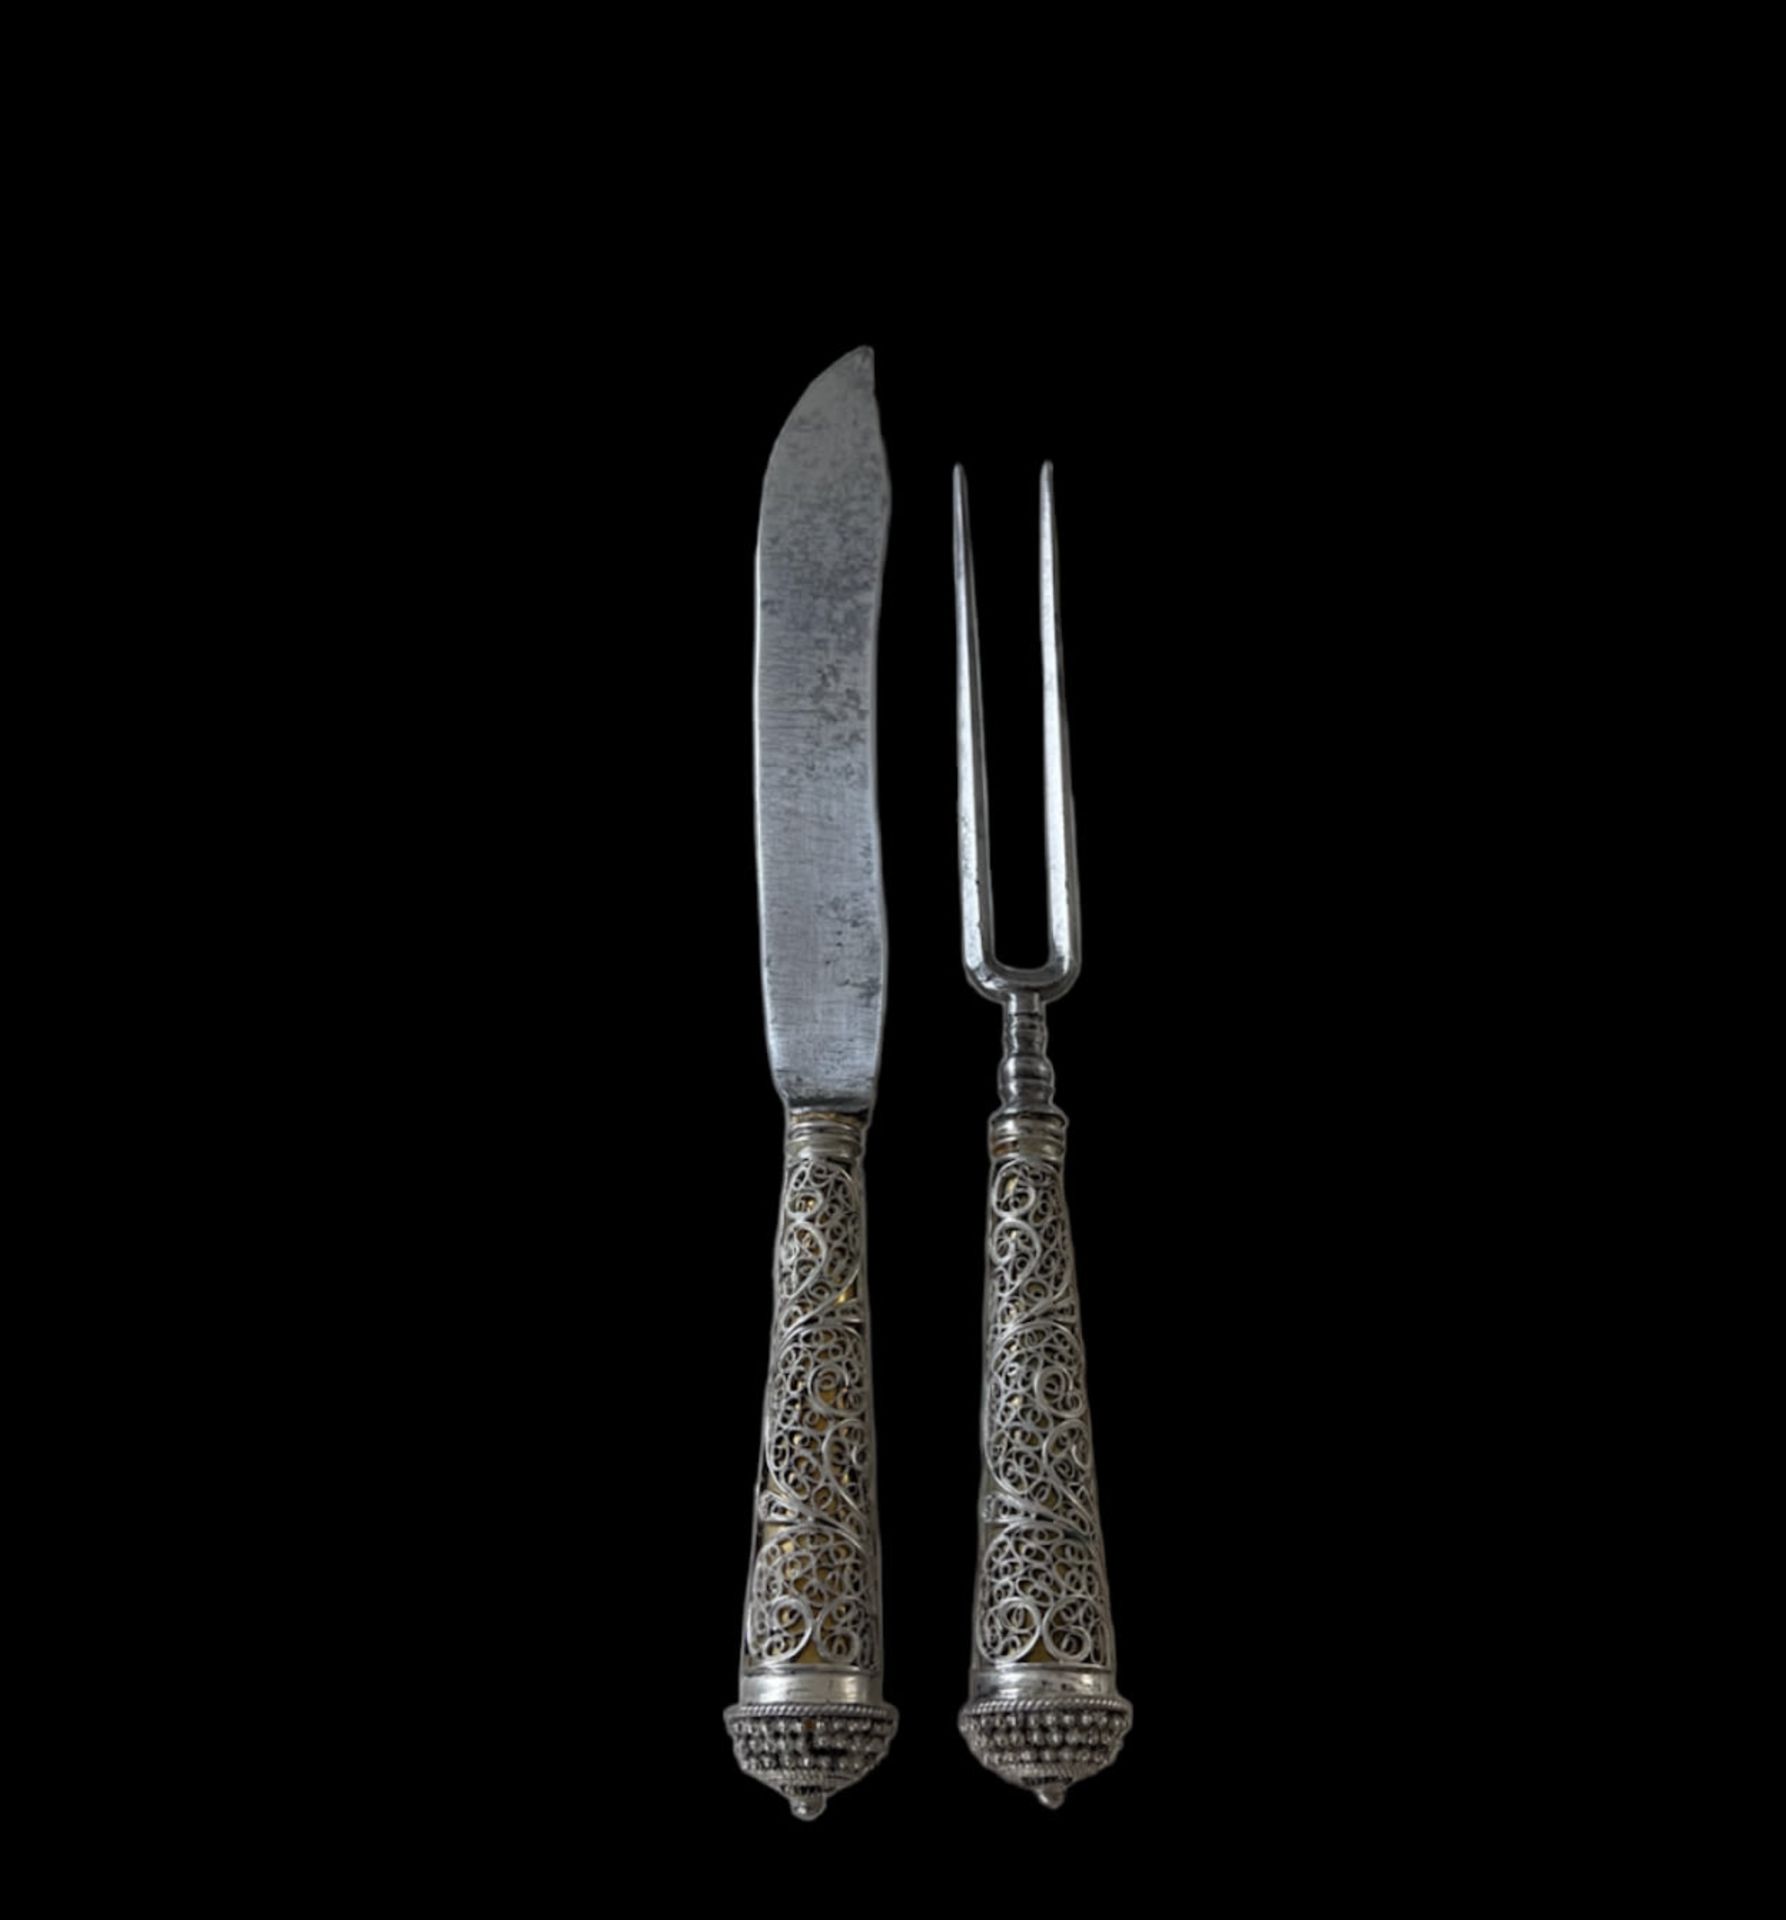 Rare pair of silver and steel Filigree Cutlery, colonial work from the Viceroyalty of Peru from the 